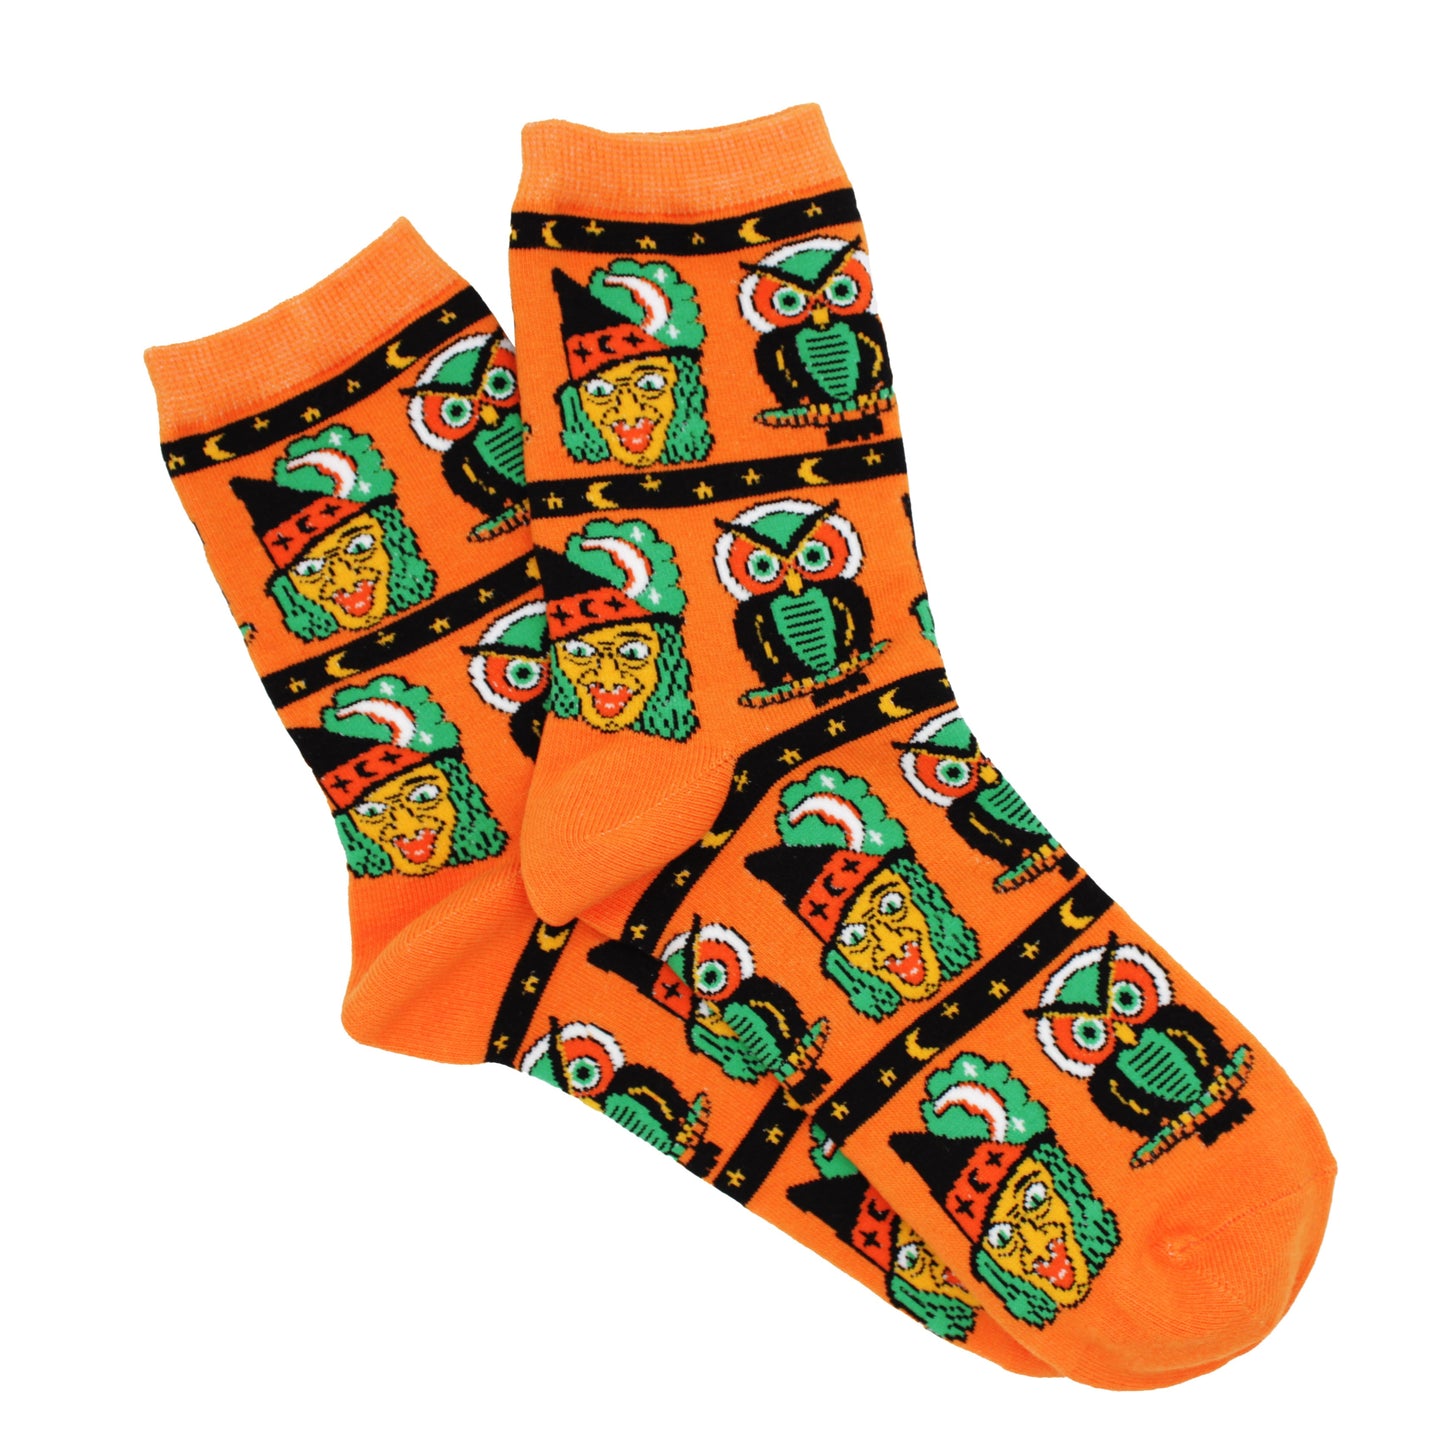 Orange Halloween Socks for Women with Spooky Owls and Witches in the Style of Vintage Halloween Decorations. Free UK Postage